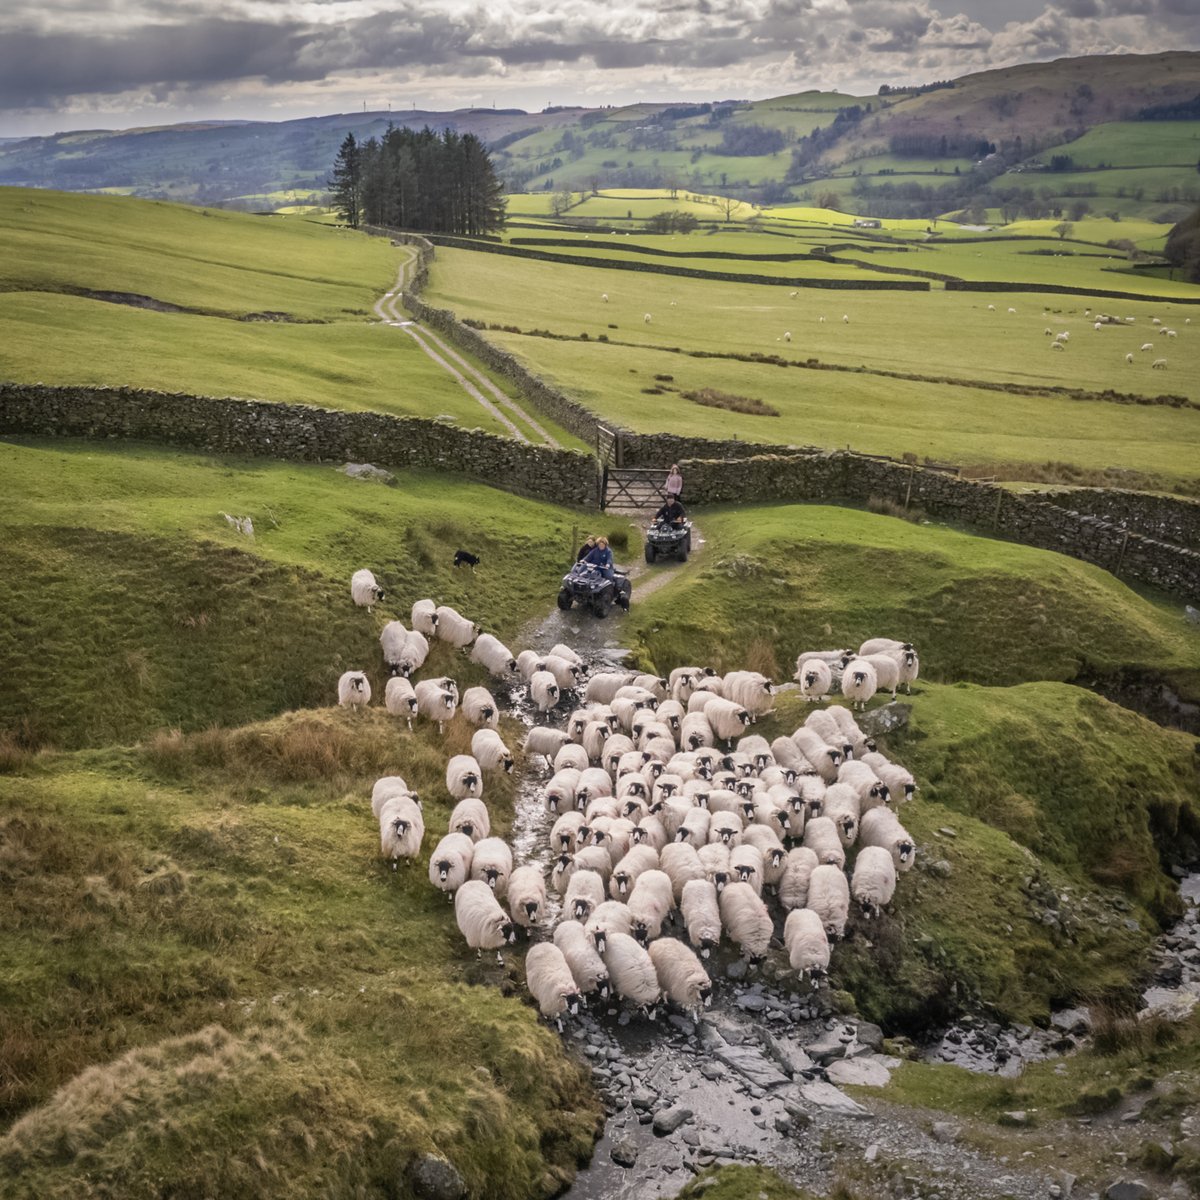 I'd love you to come & join me for my talk & supper Thurs 9th May, Kelsick Grammar School, Ambleside. ‘Forty Farms – Behind the Scenes’ provides a unique insight into the book, how I created the images, with some hilarious anecdotes from the project. kelsickgrammar.co.uk/events.html